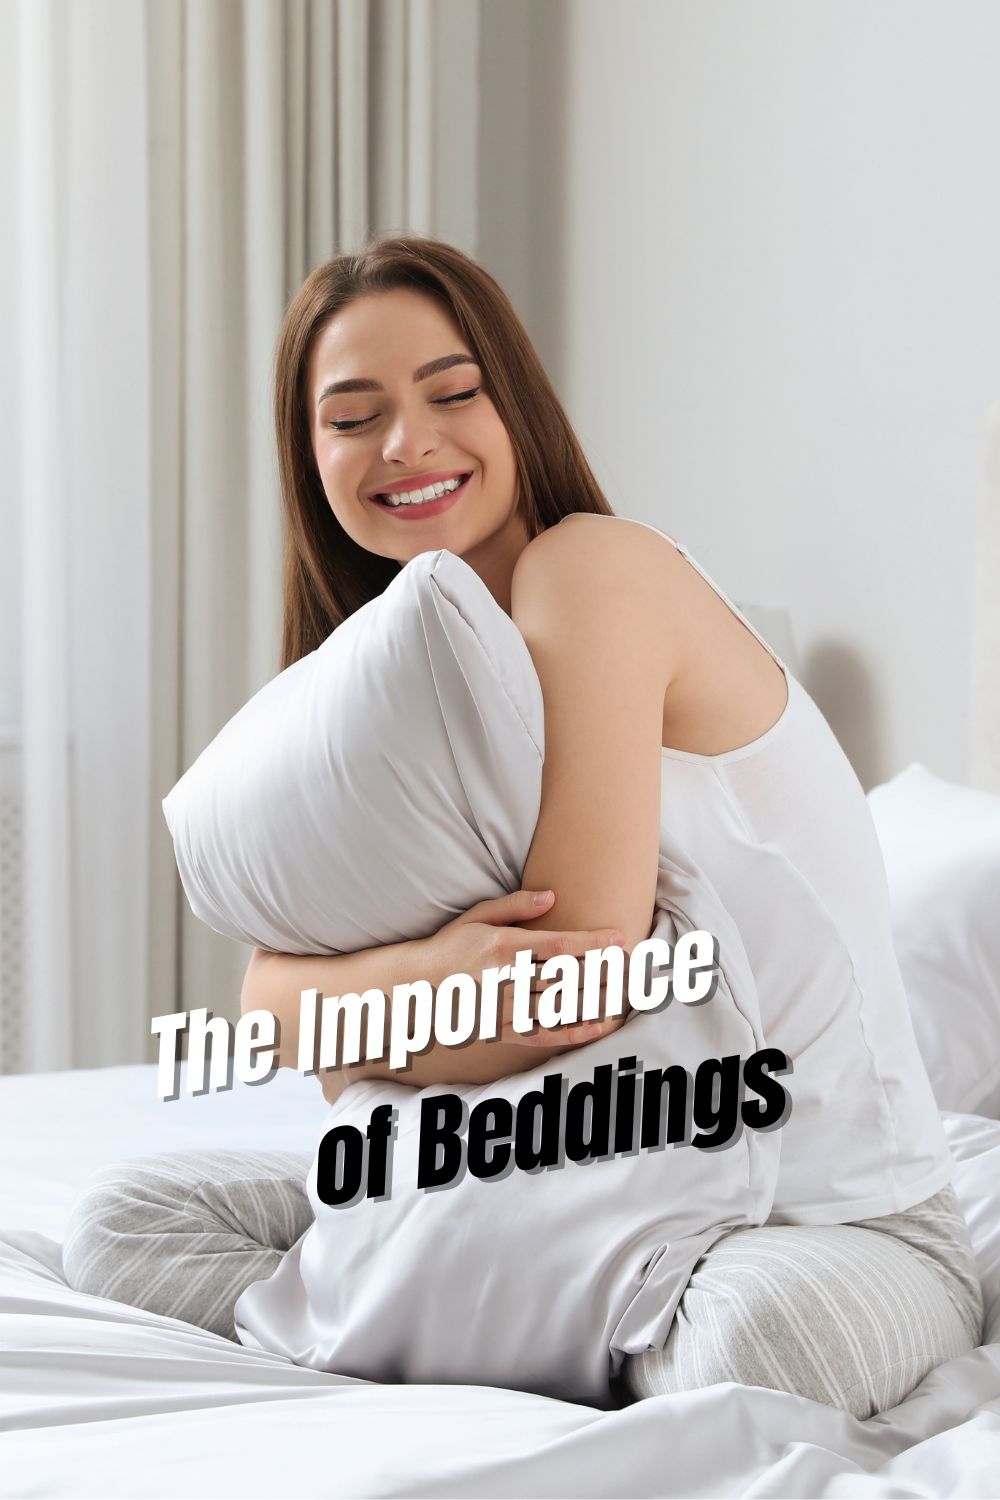 experts-at-mattress-stores-in-San-Diego-tell-us-the-importance-of-beddings